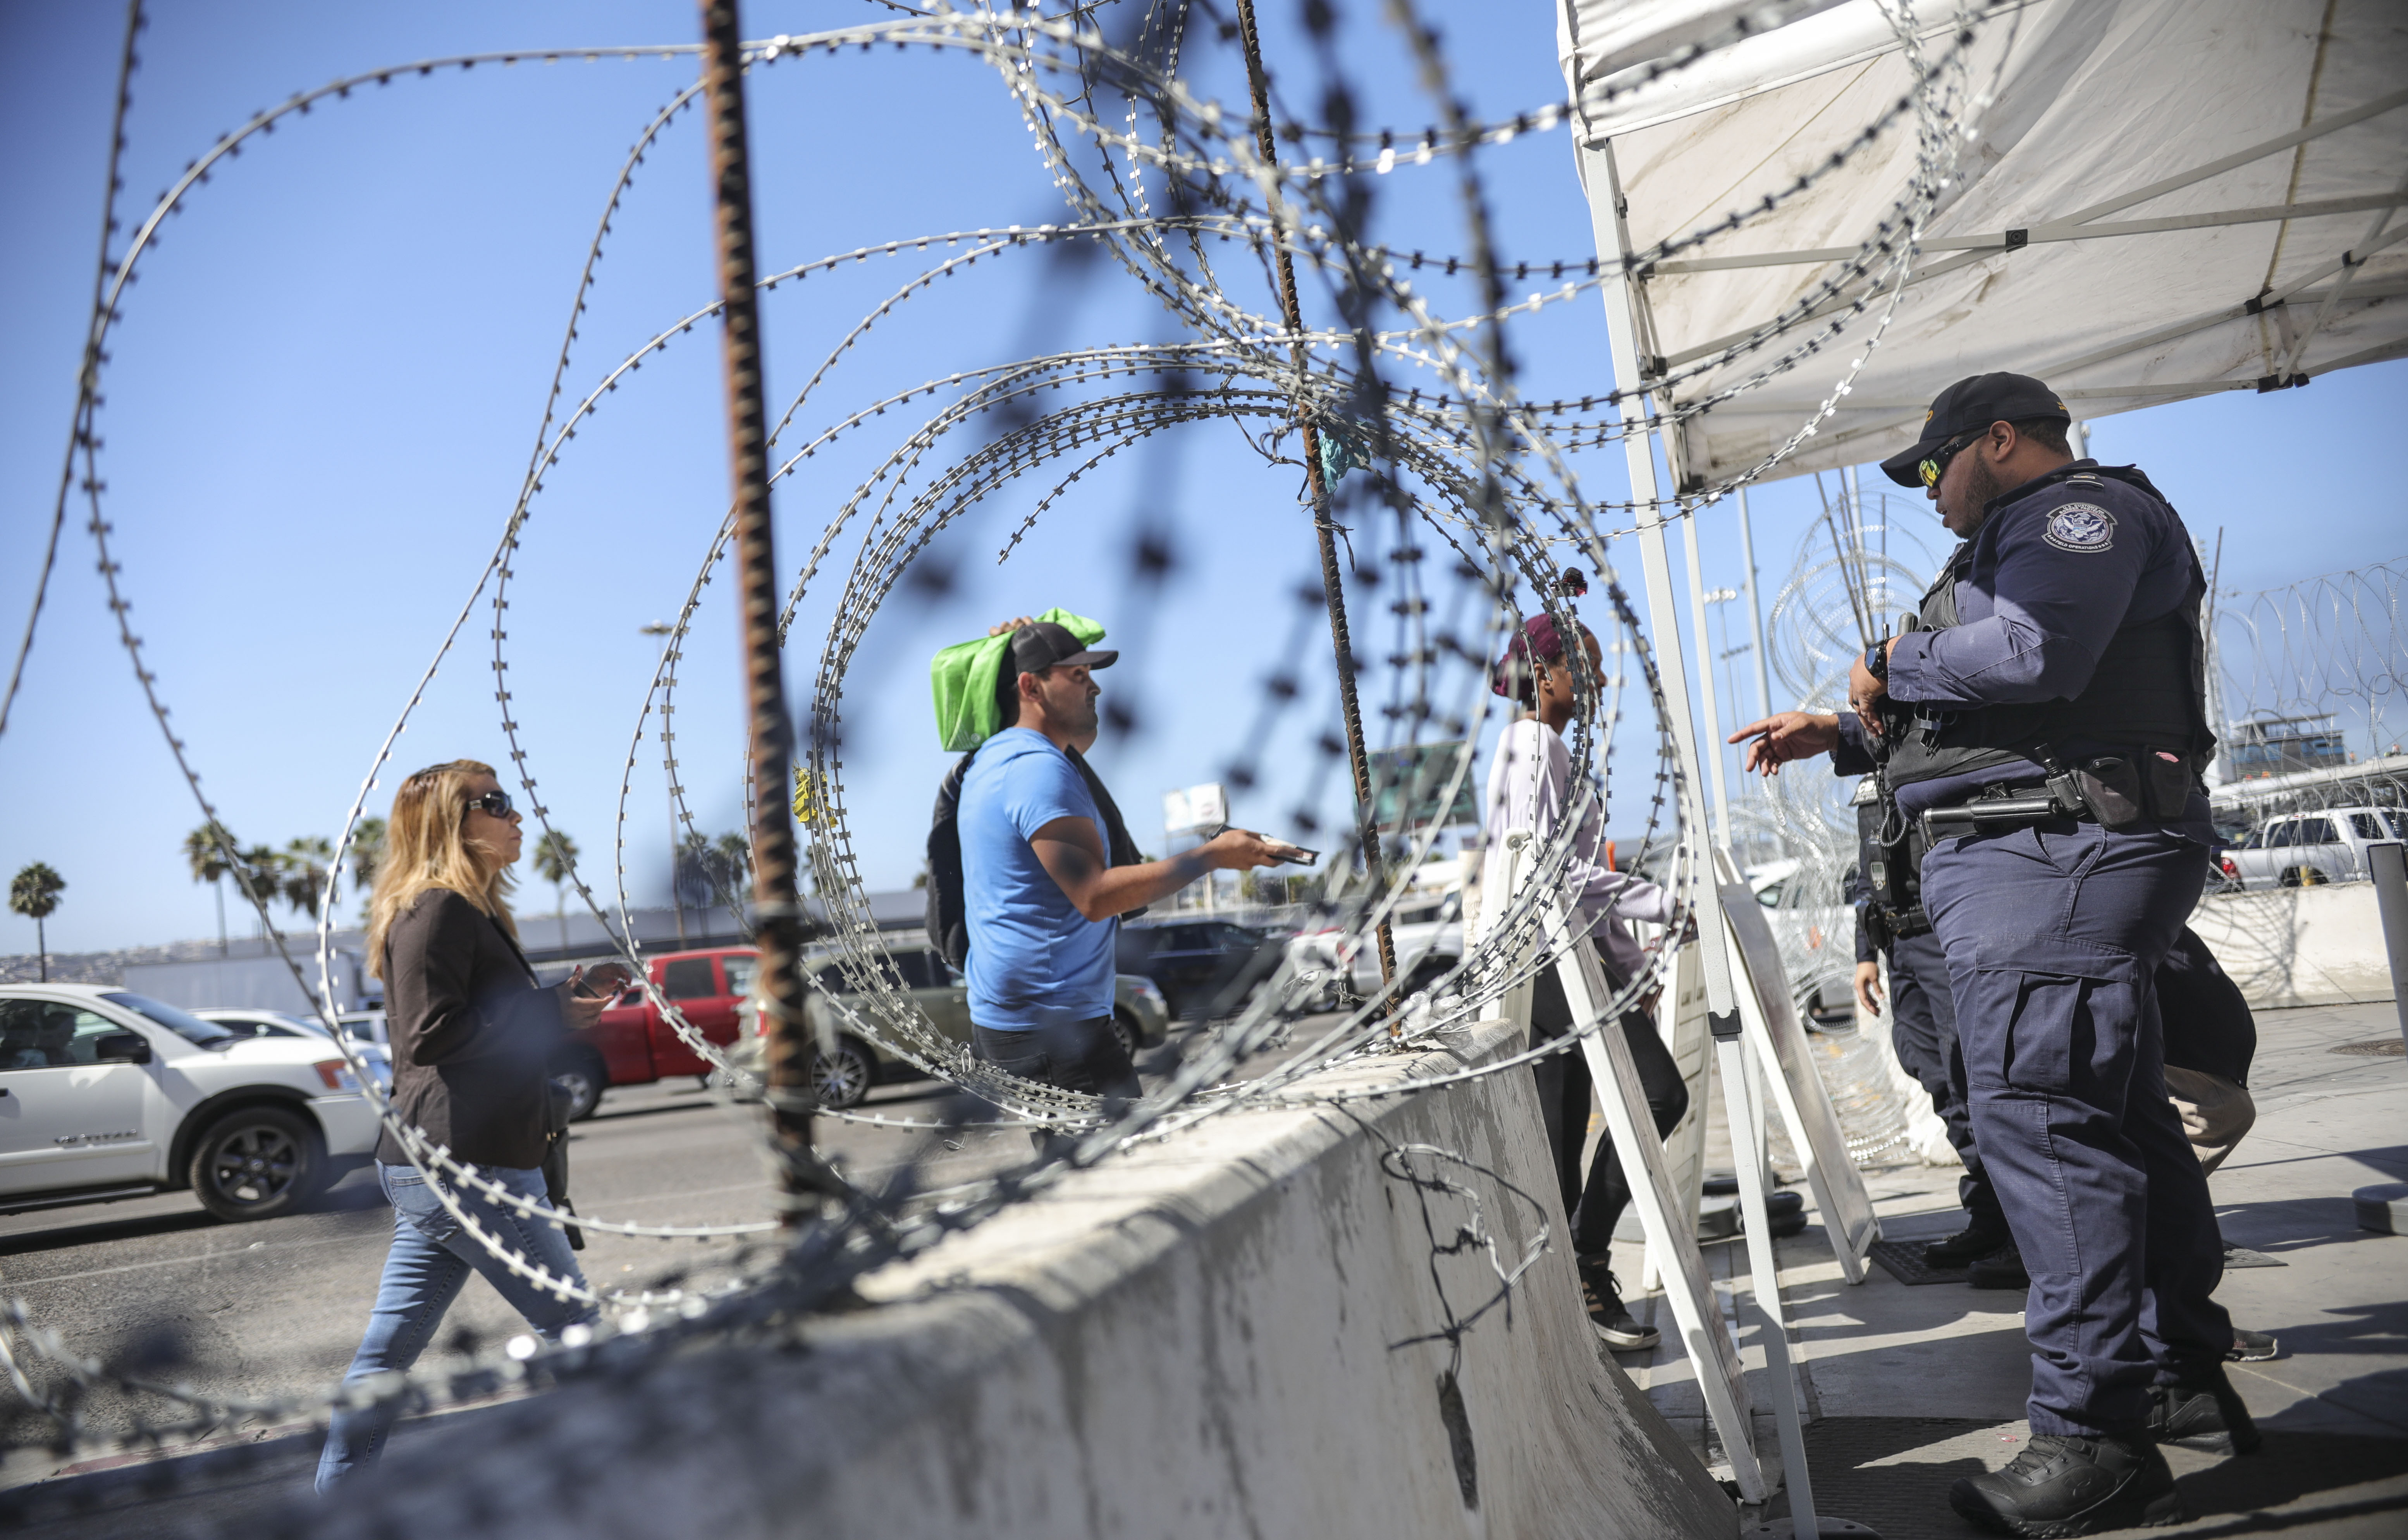 An Immigration and Customs Enforcement (ICE) agents check pedestrians' documentation at the San Ysidro Port of Entry on October 2, 2019 in San Ysidro, California. - Fentanyl, a powerful painkiller approved by the US Food and Drug Administration for a range of conditions, has been central to the American opioid crisis which began in the late 1990s. China was the first country to manufacture illegal fentanyl for the US market, but the problem surged when trafficking through Mexico began around 2005, according to Donovan. (Photo by SANDY HUFFAKER / AFP) (Photo by SANDY HUFFAKER/AFP via Getty Images)